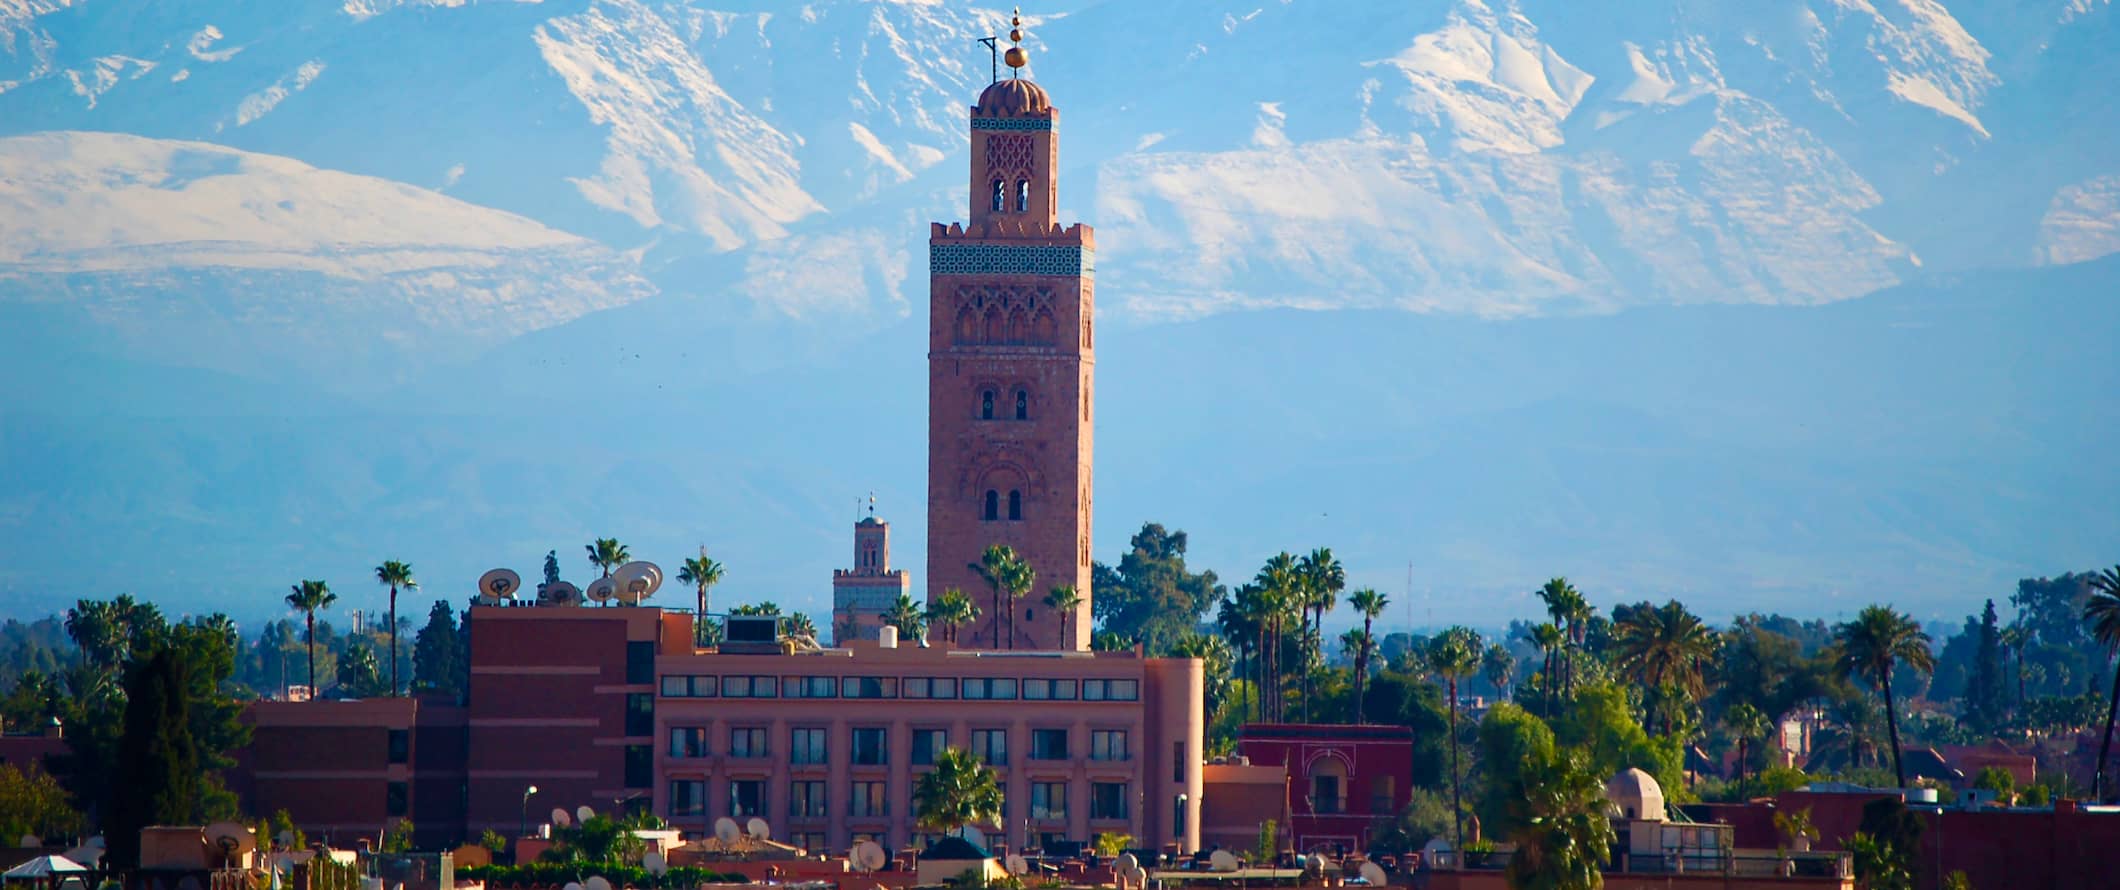 city view of Marrakesh, Morocco featuring a tower in the foreground and stunning mountains in the distance